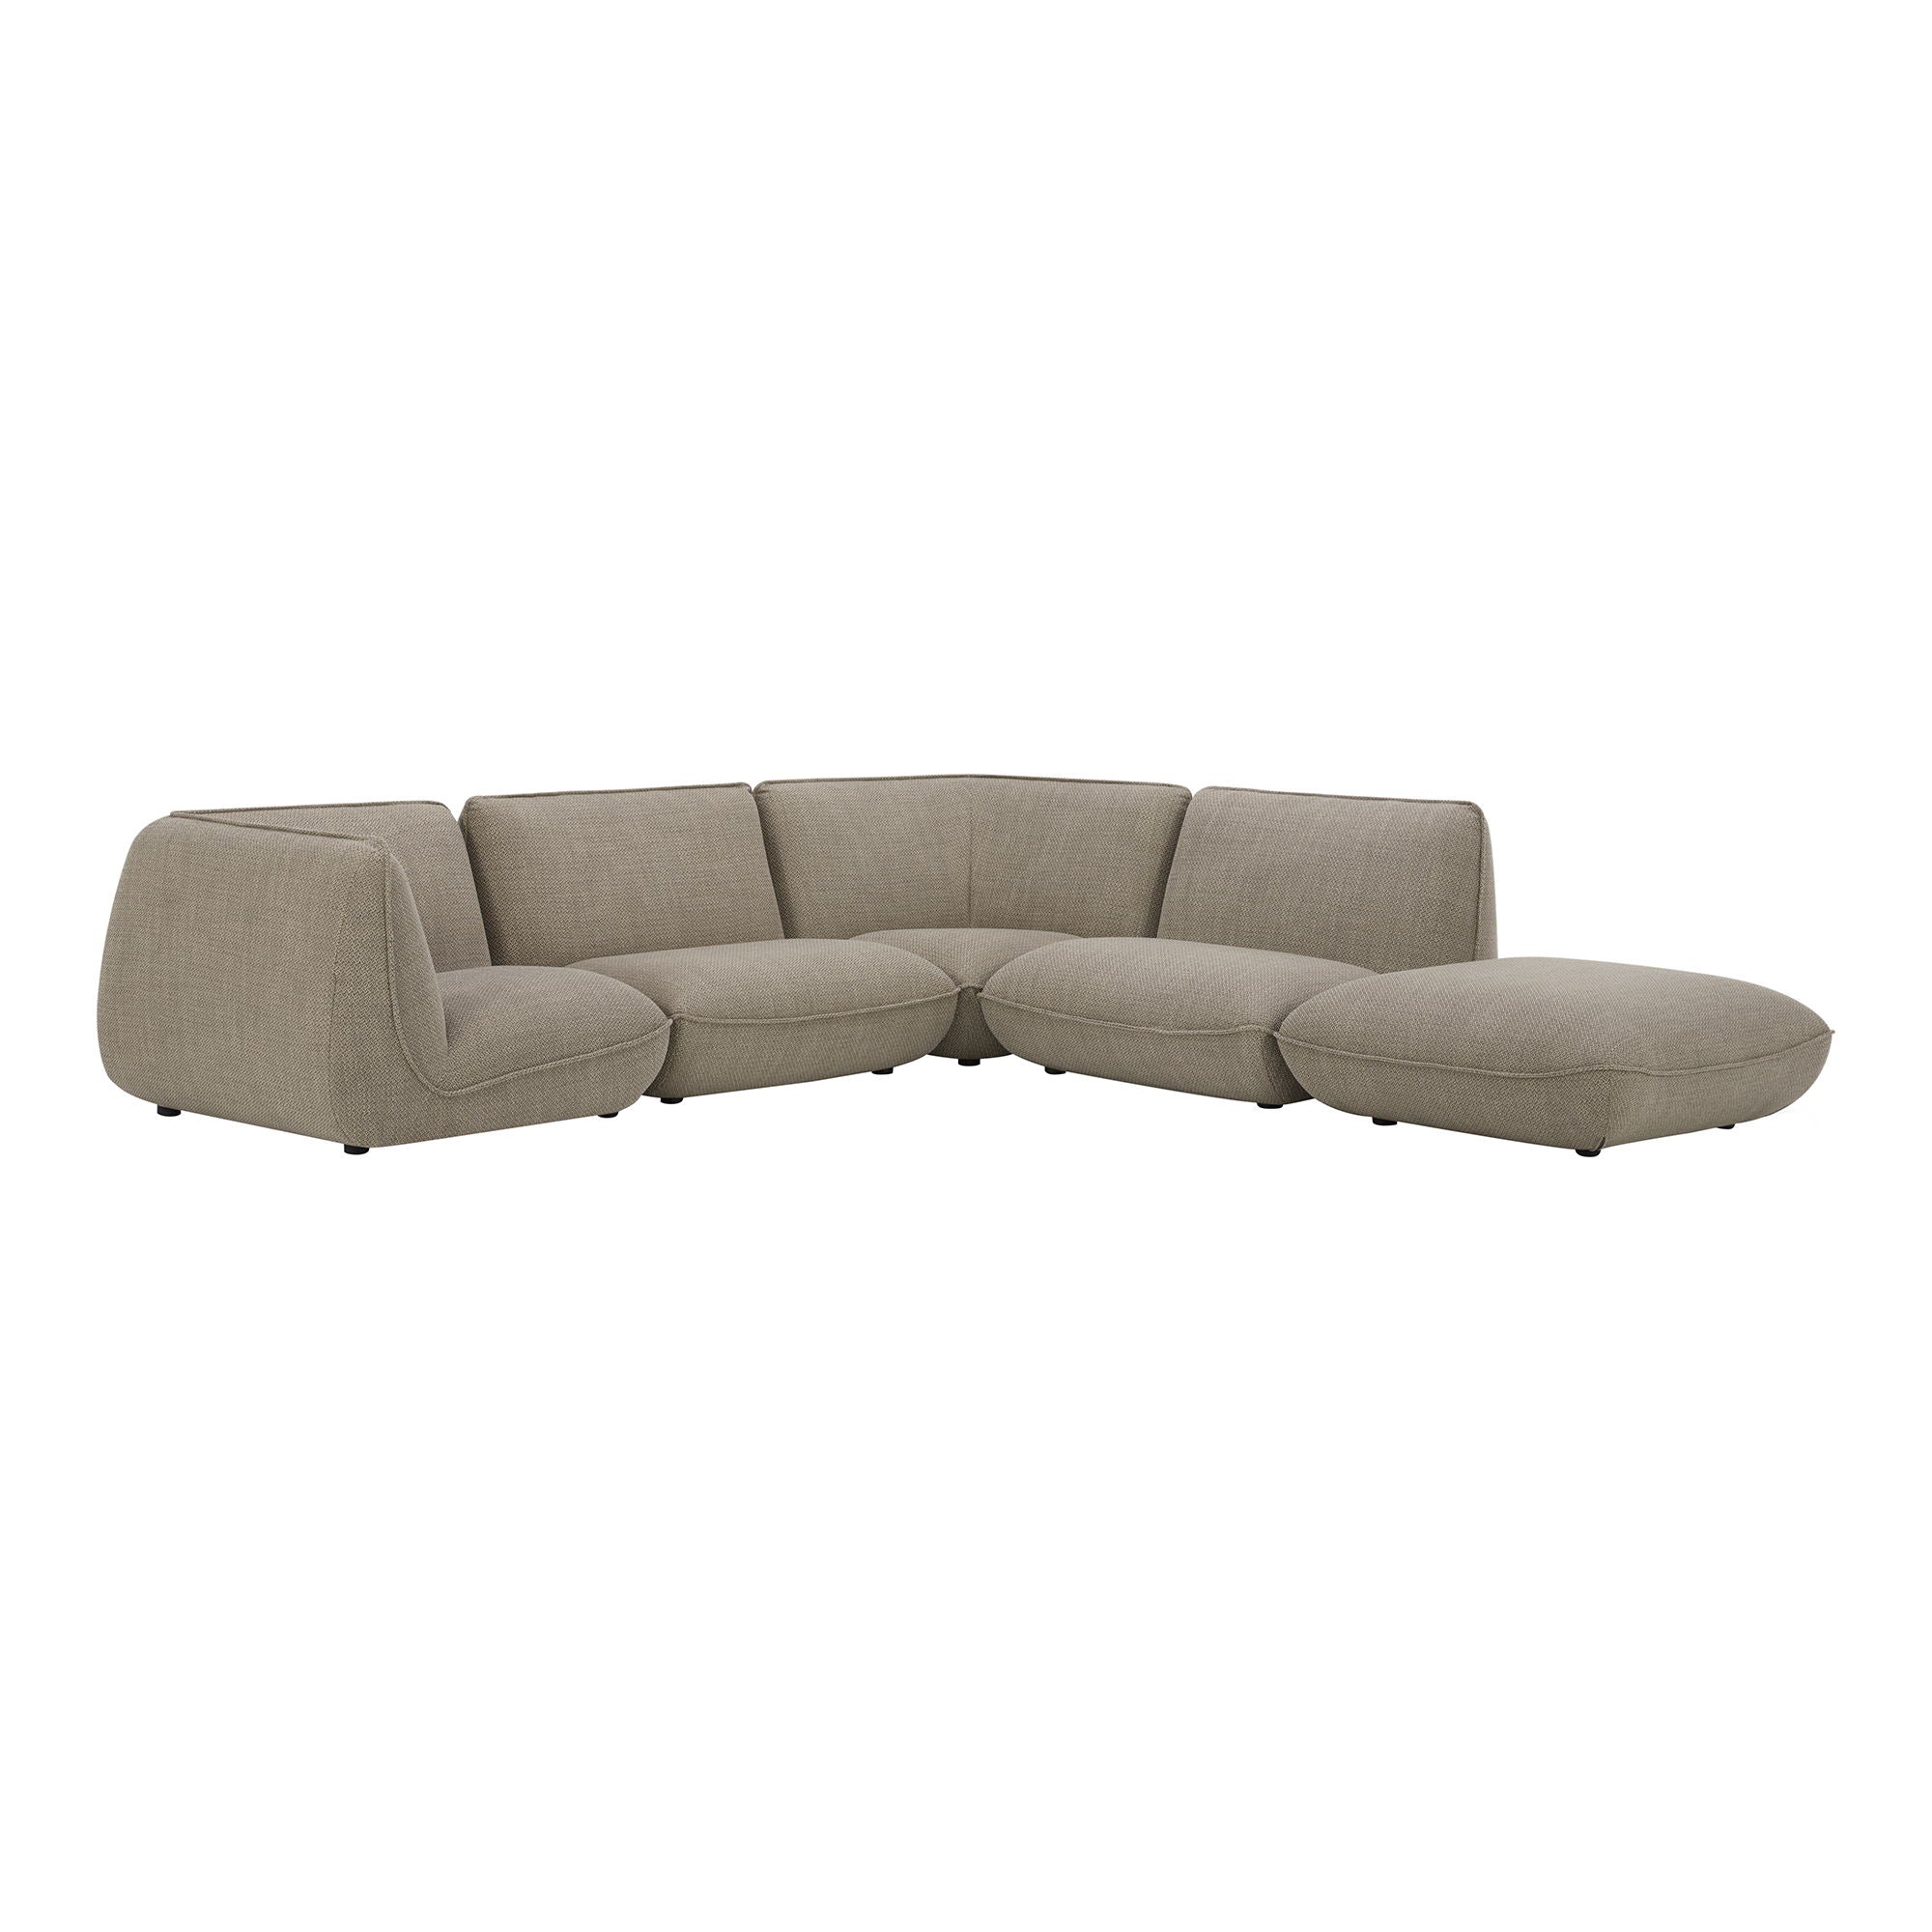 Zeppelin - Dream Modular Sectional - Dark Gray-Stationary Sectionals-American Furniture Outlet